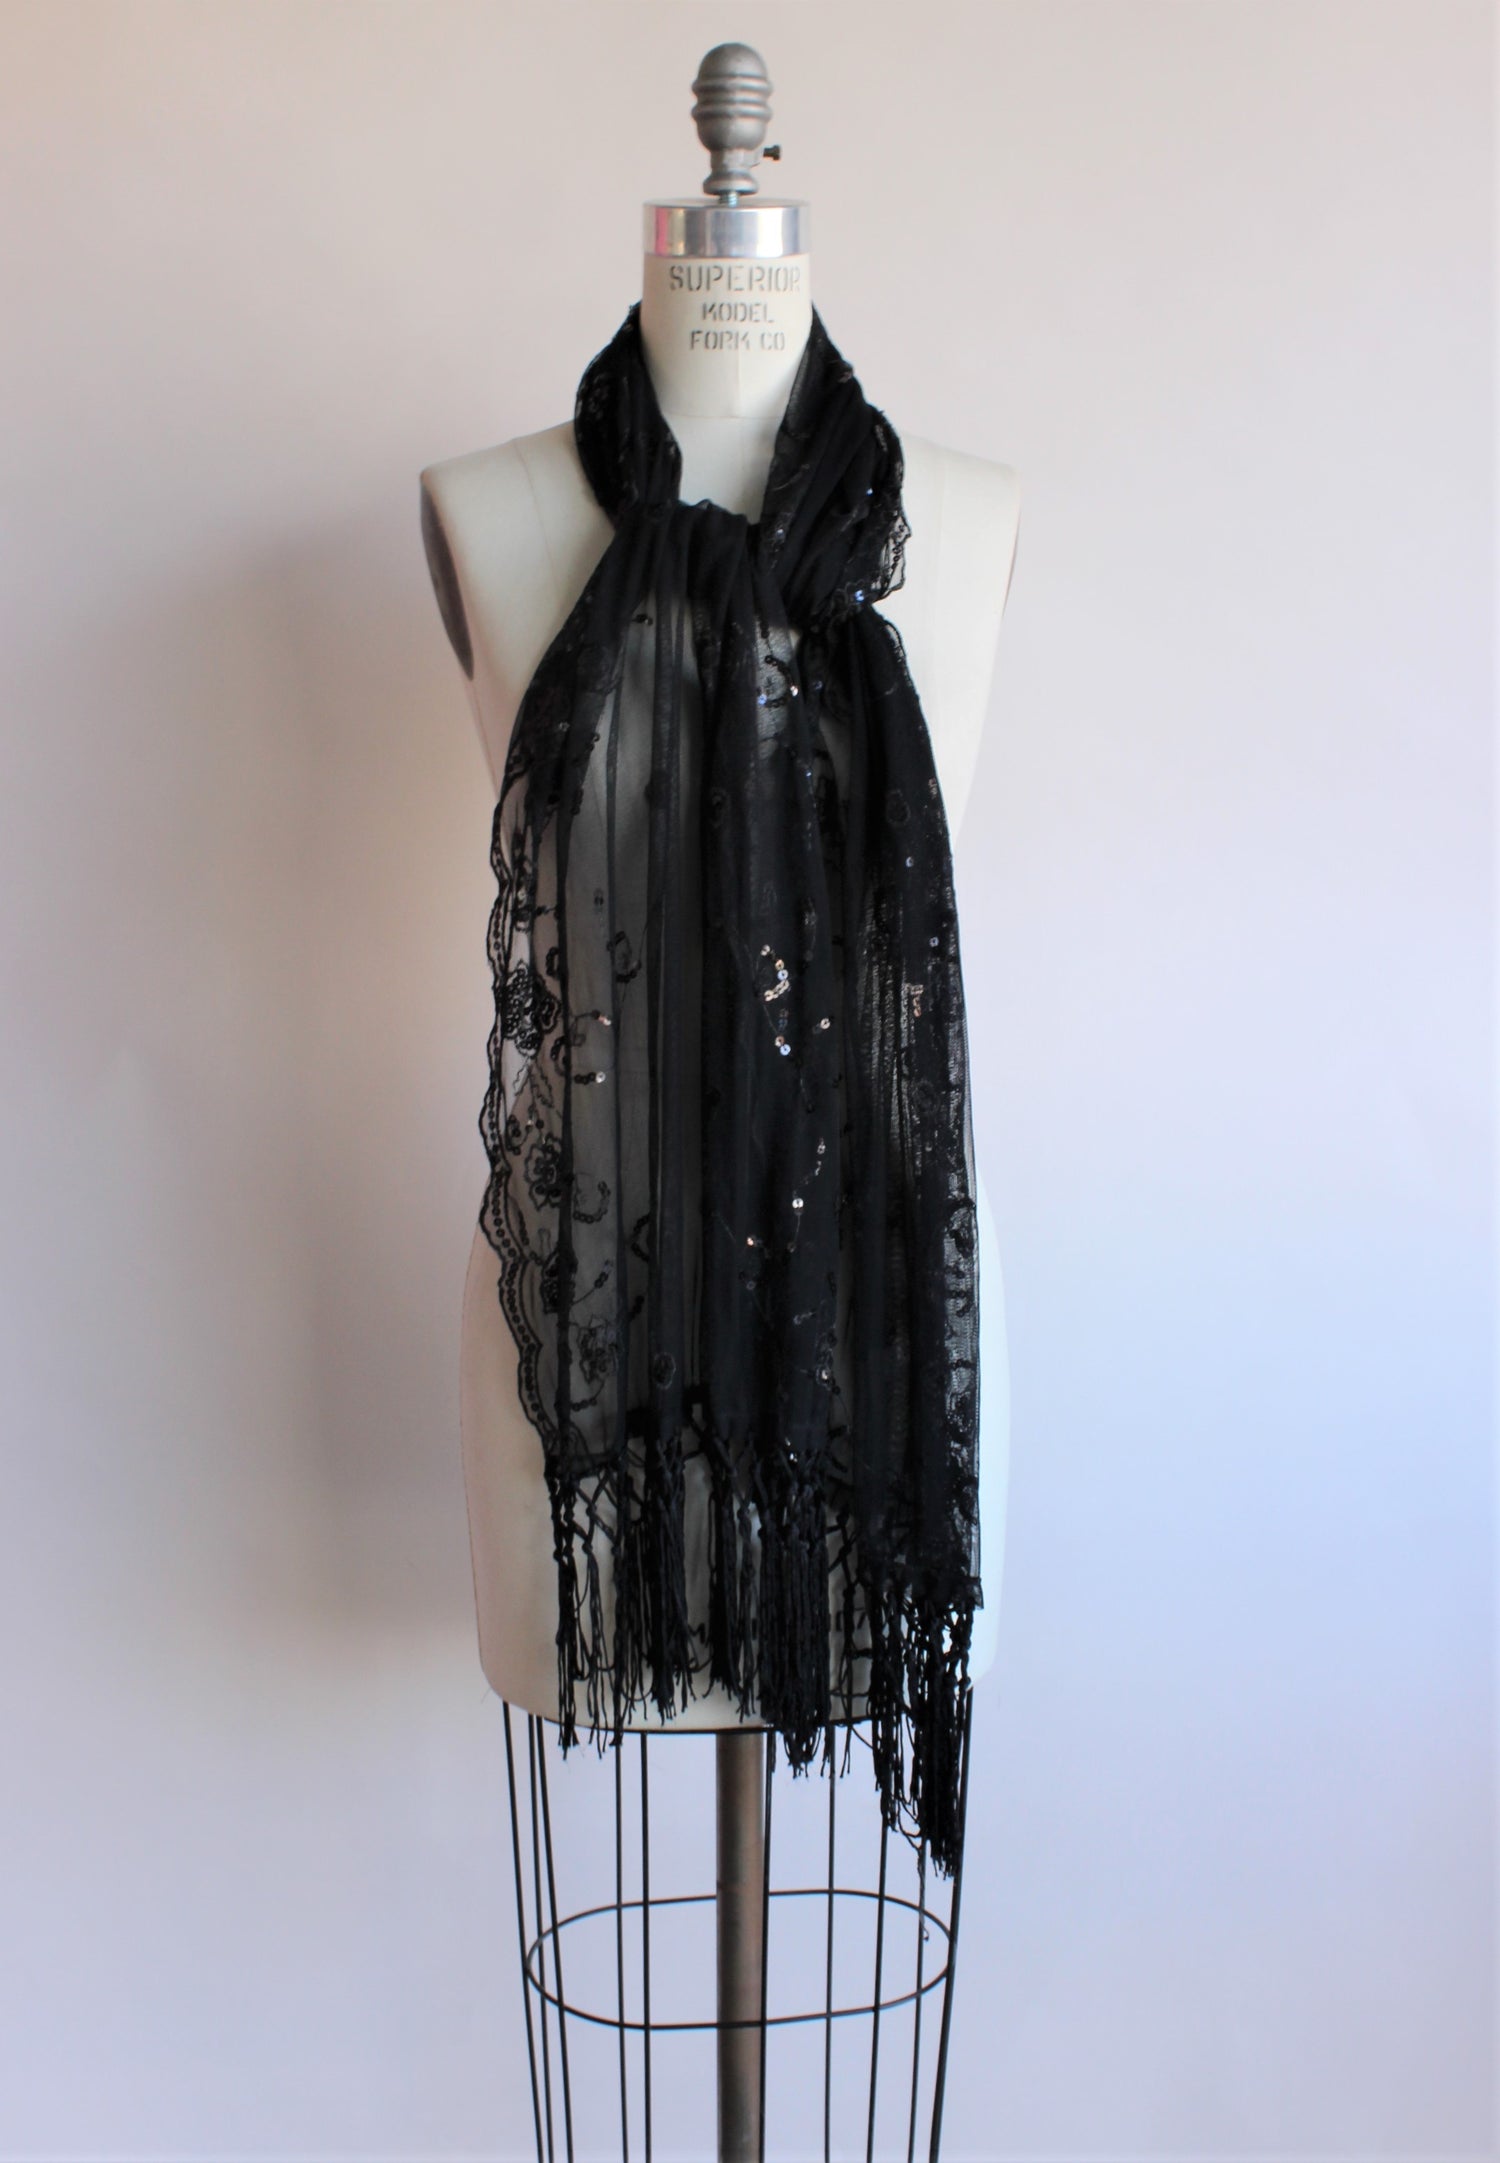 Vintage 1990s Black Lace and Sequin Scarf or Wrap.